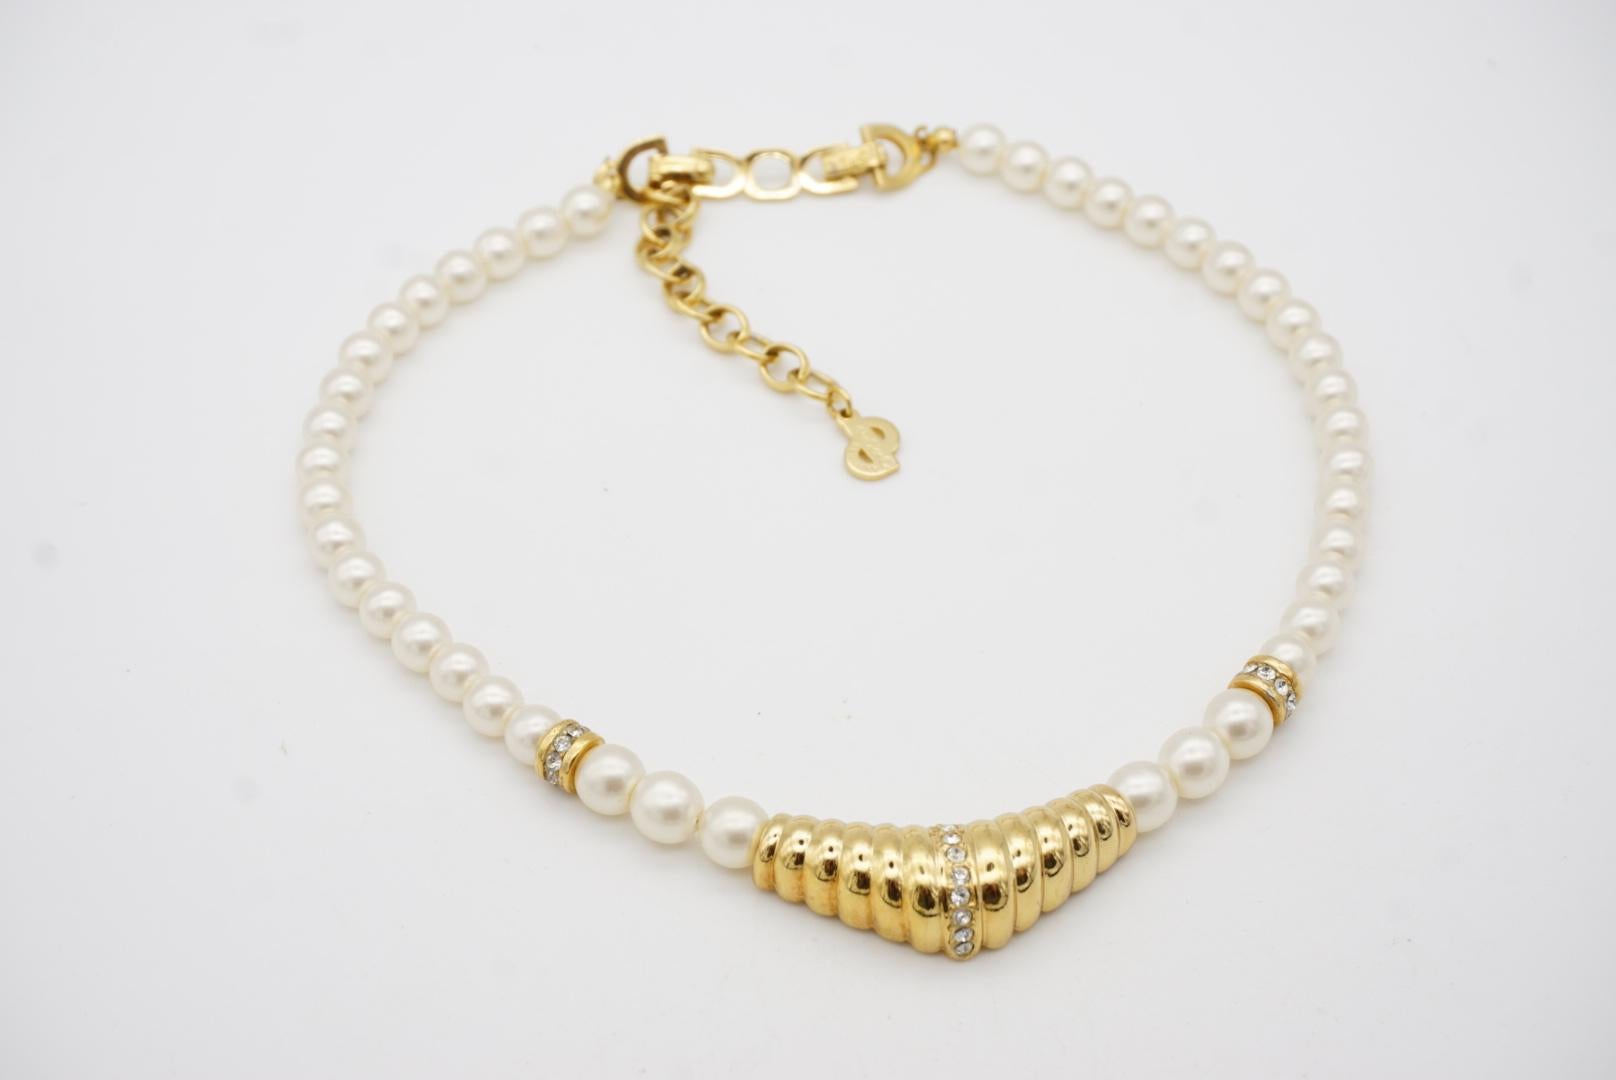 Christian Dior Vintage 1970s White Pearls Triangle Crystals Pendant Necklace For Sale 5